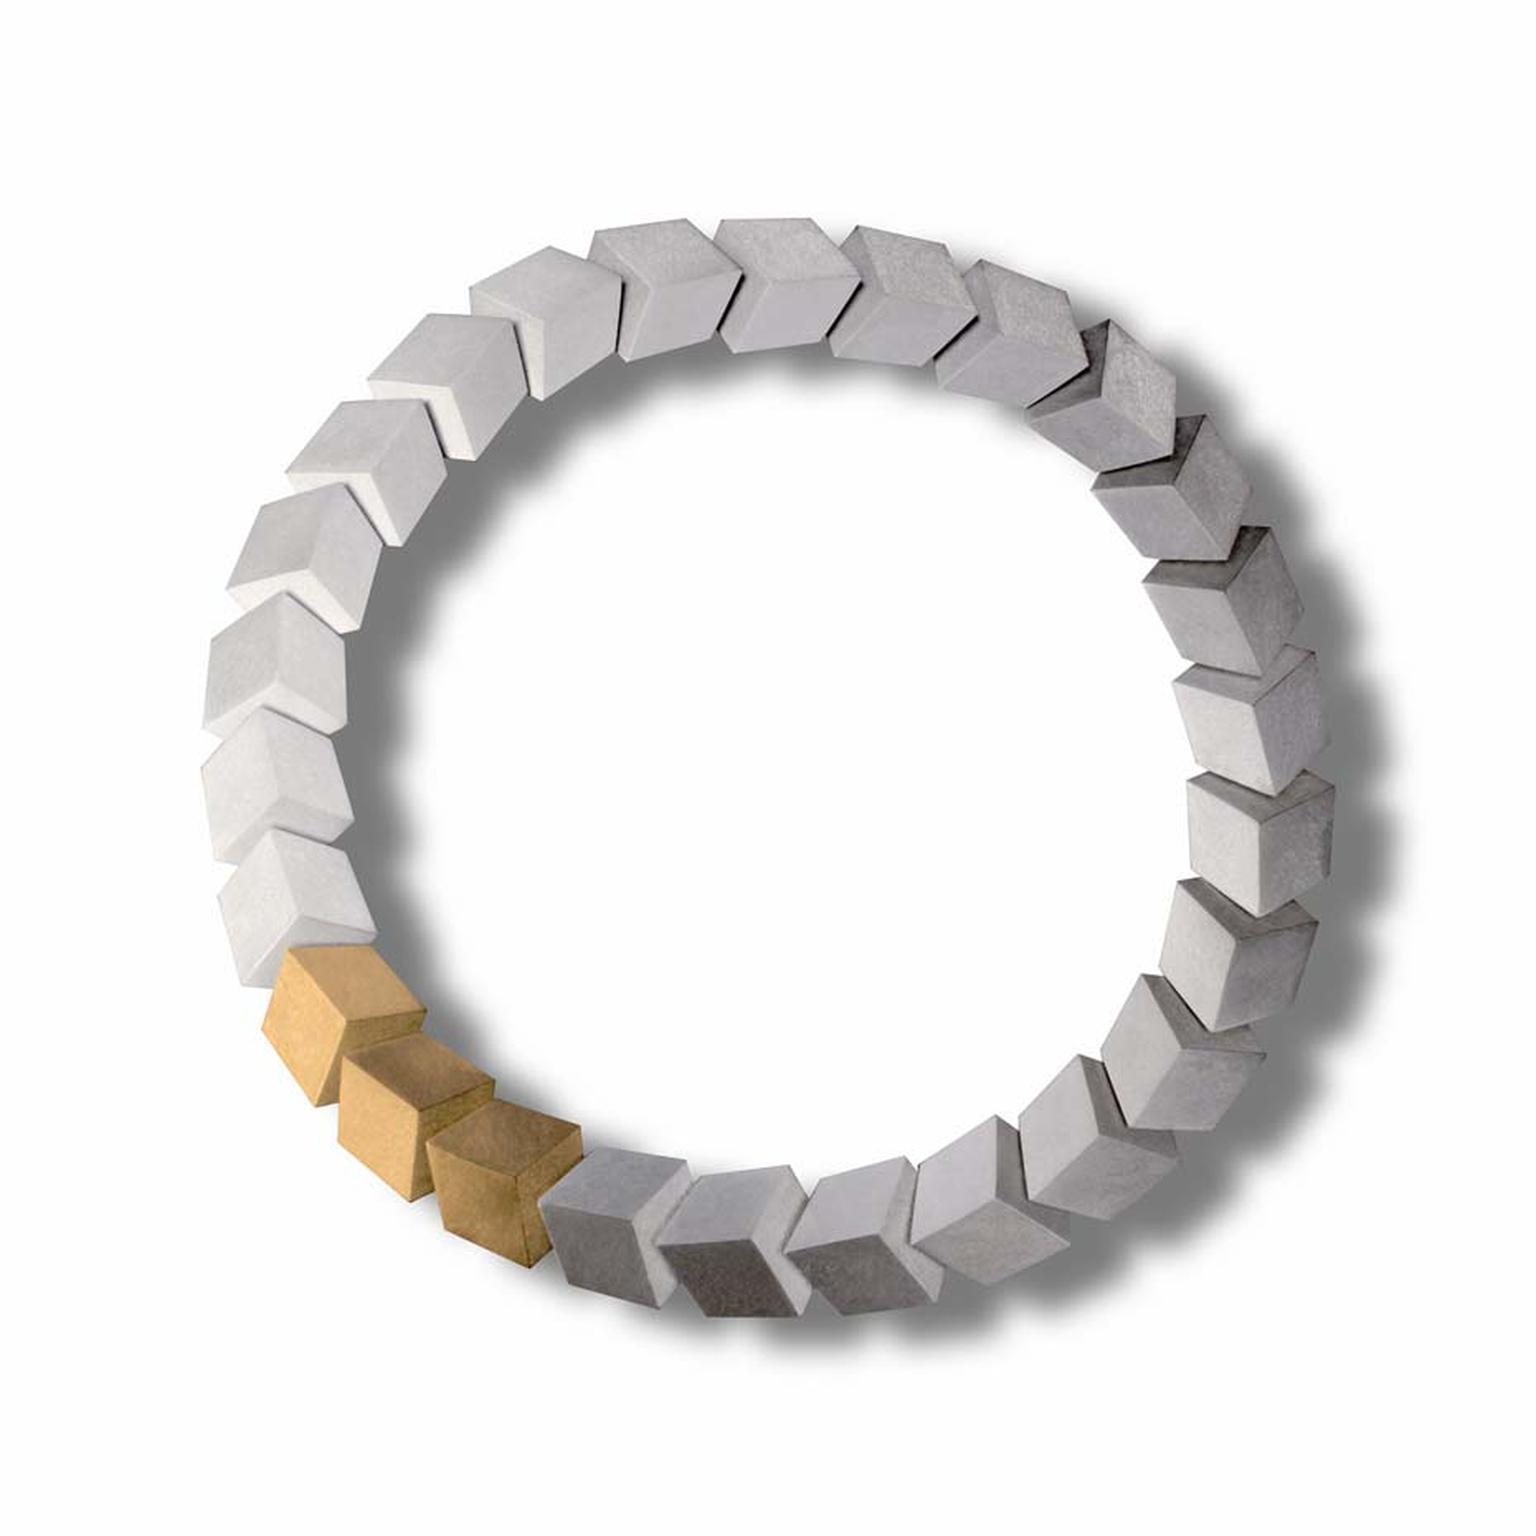 Known for his illusionistic treatment of space, Claude Chavent's Cubes necklace in gold and silver will be on display during the exhibition to celebrate 40 years of the Aaron Faber Gallery in New York.